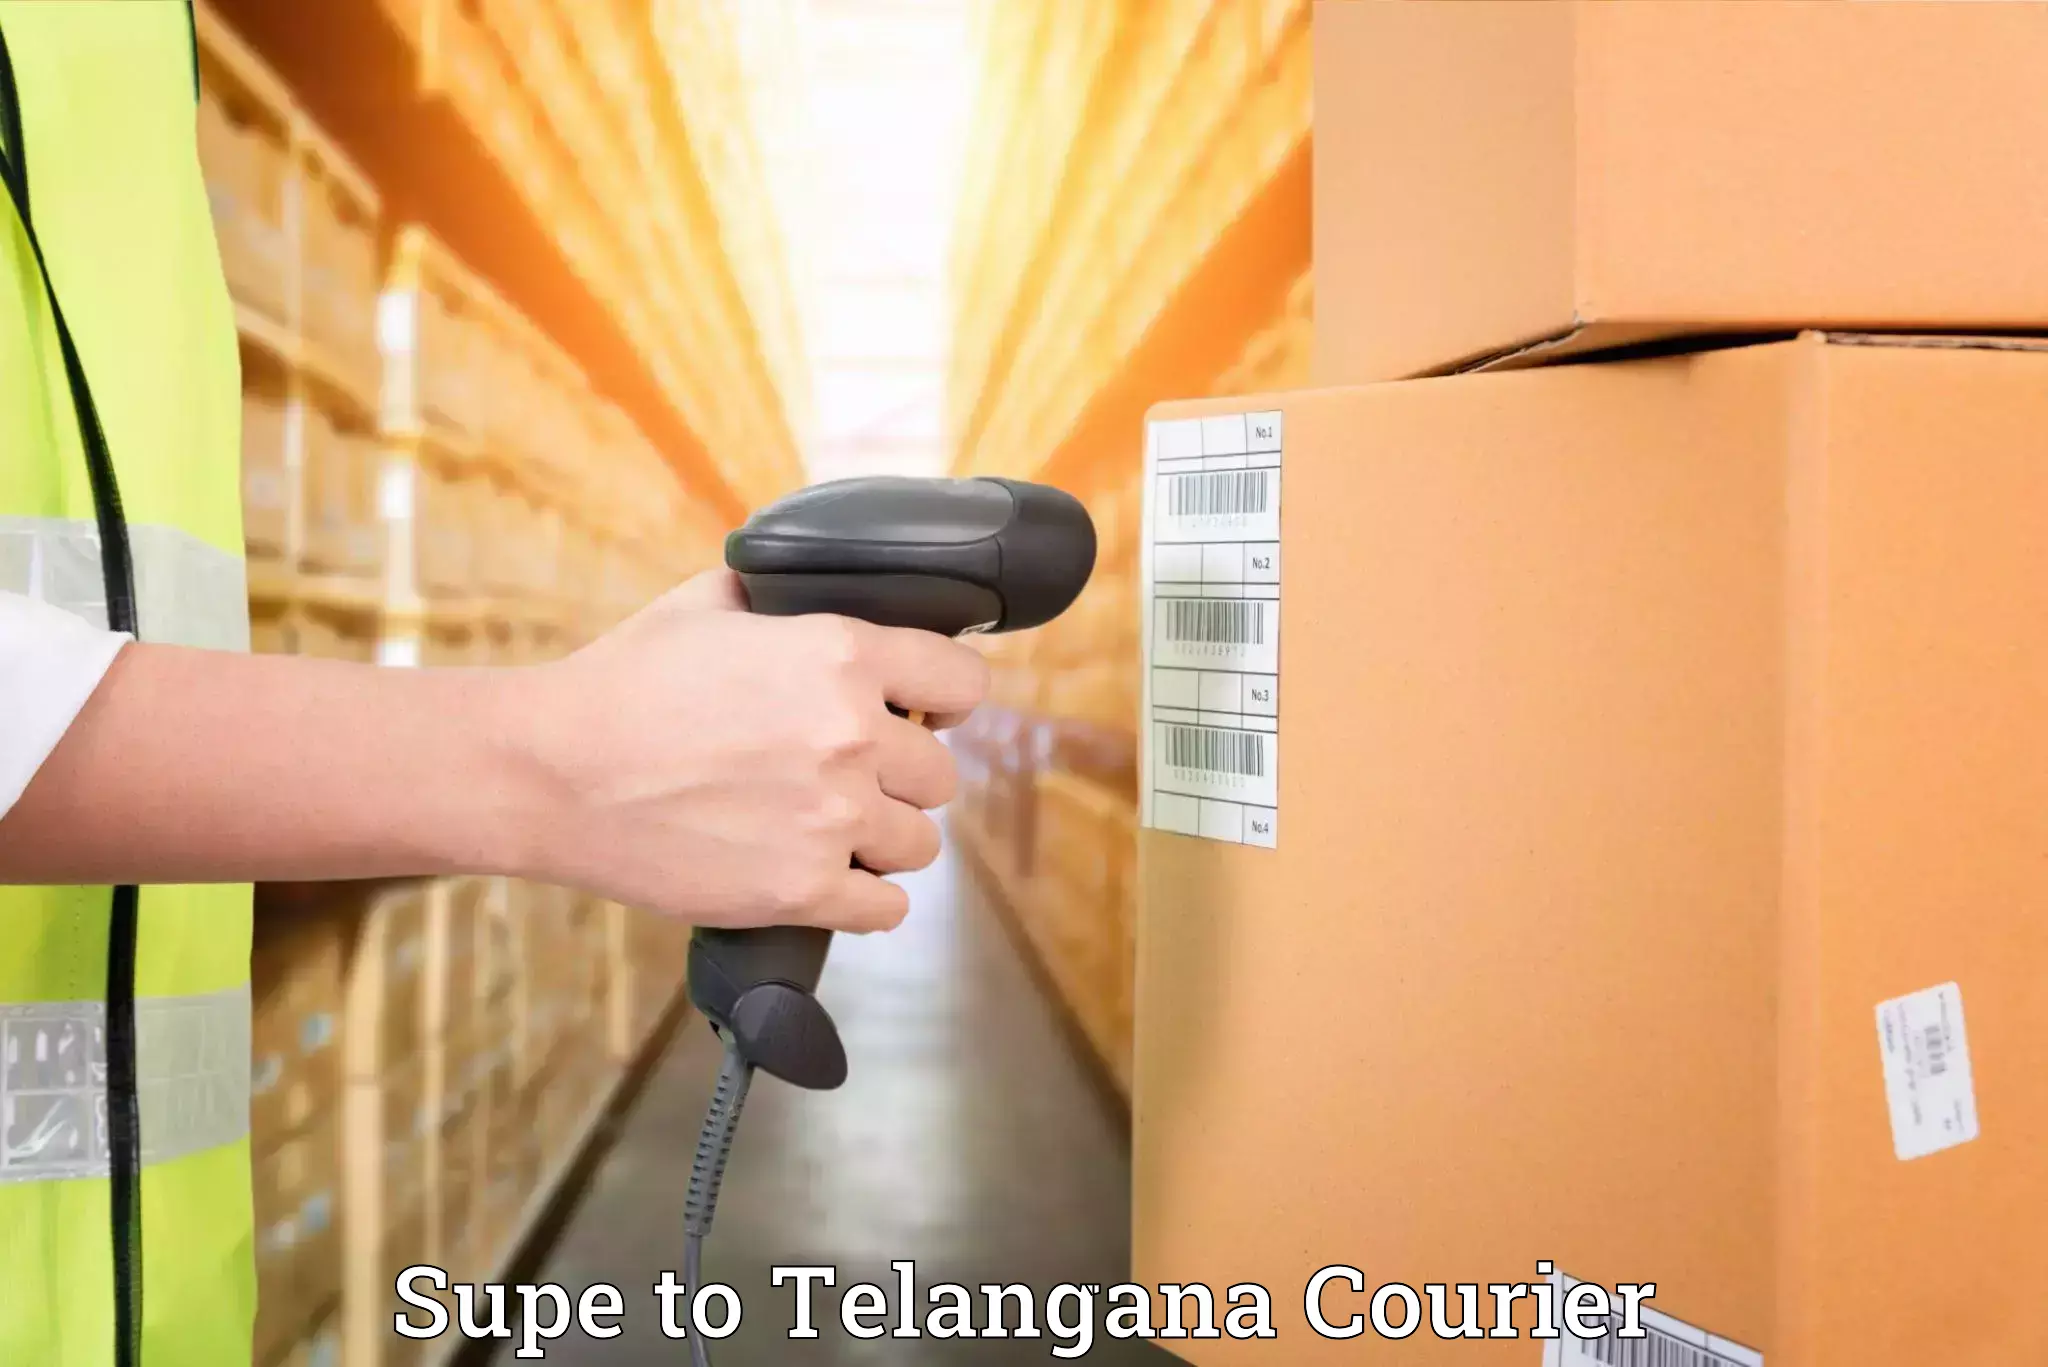 Moving service excellence Supe to Telangana